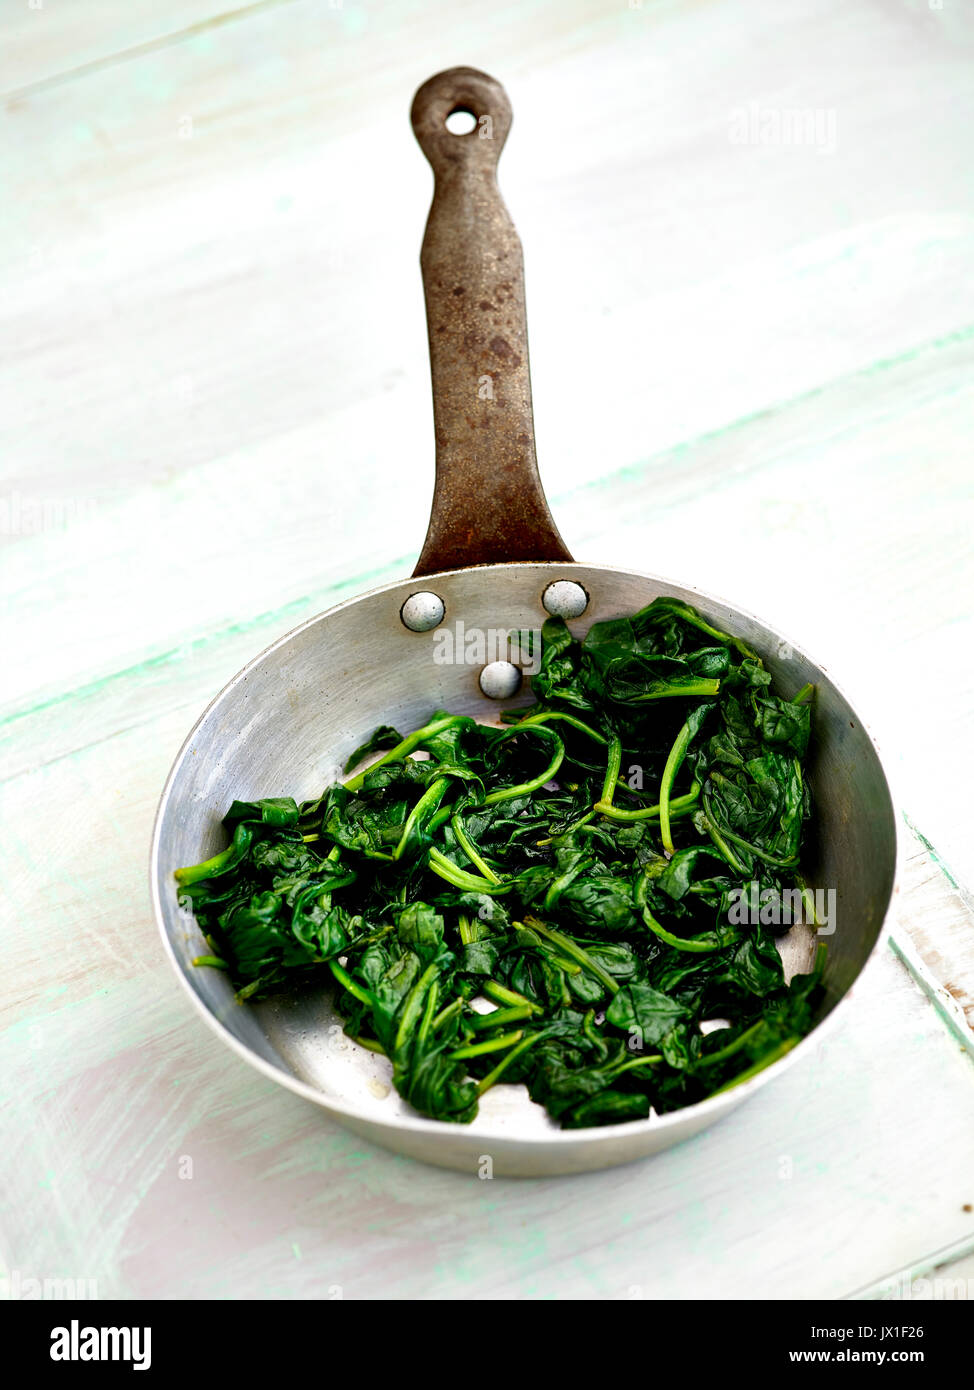 pan wilted spinach in small frying pan Stock Photo